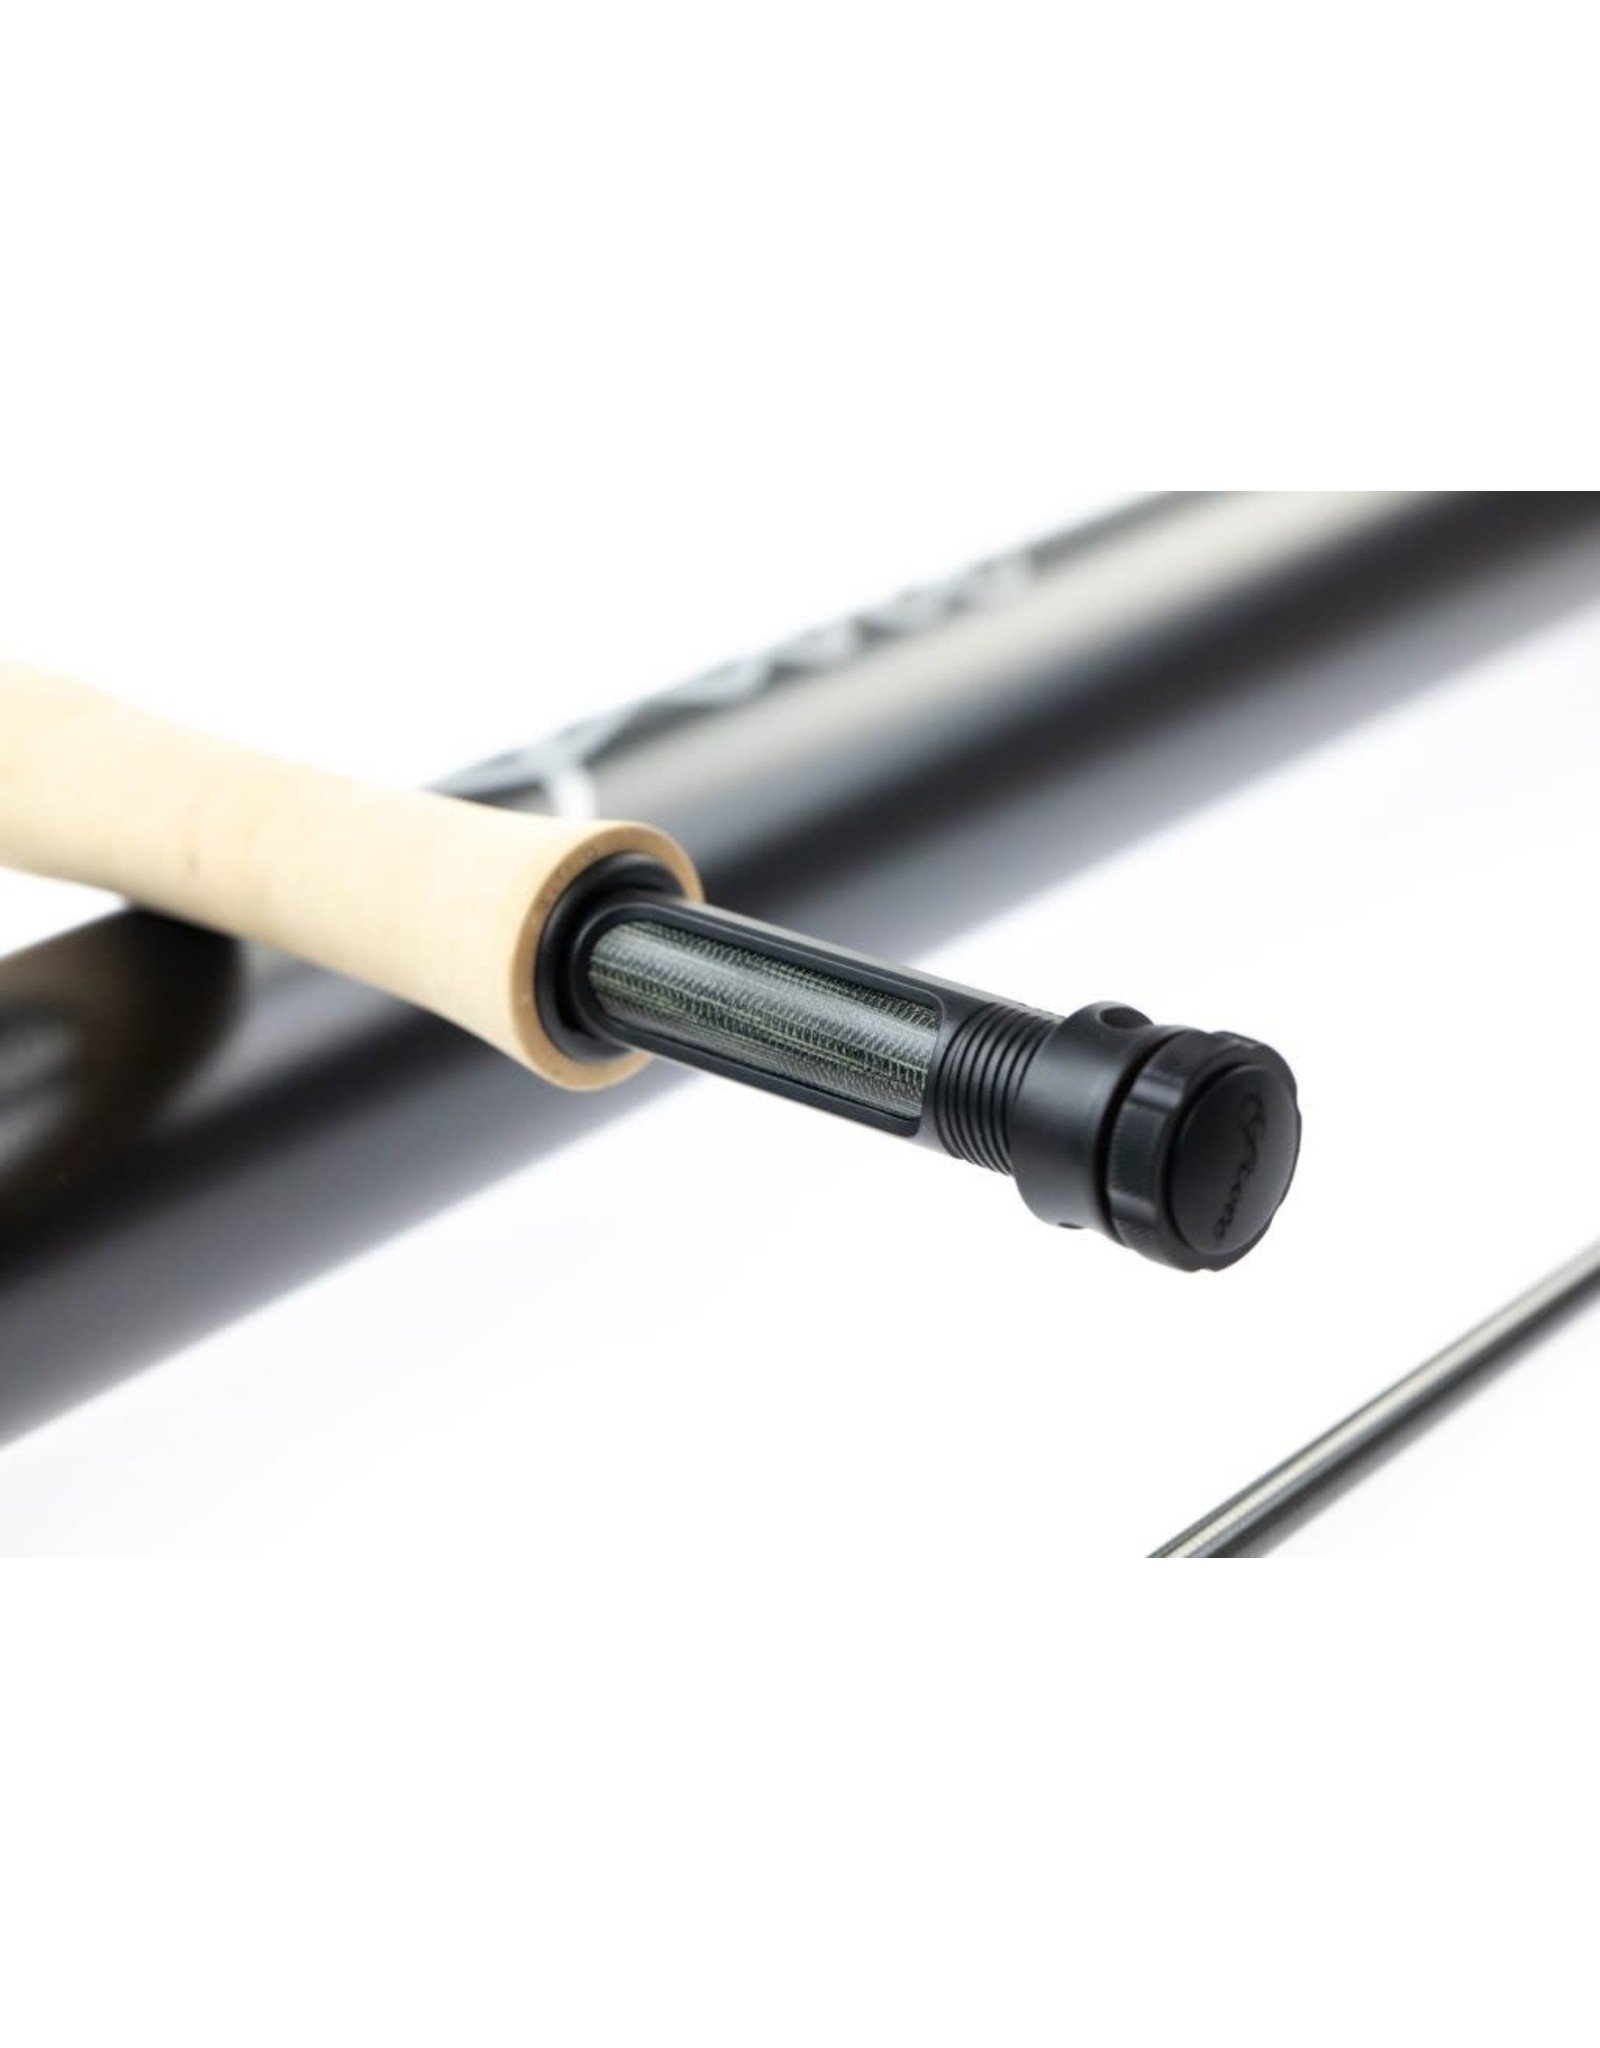 SCOTT Centric 8' 6 4wt (4pc) Fly Rod - Royal Gorge Anglers